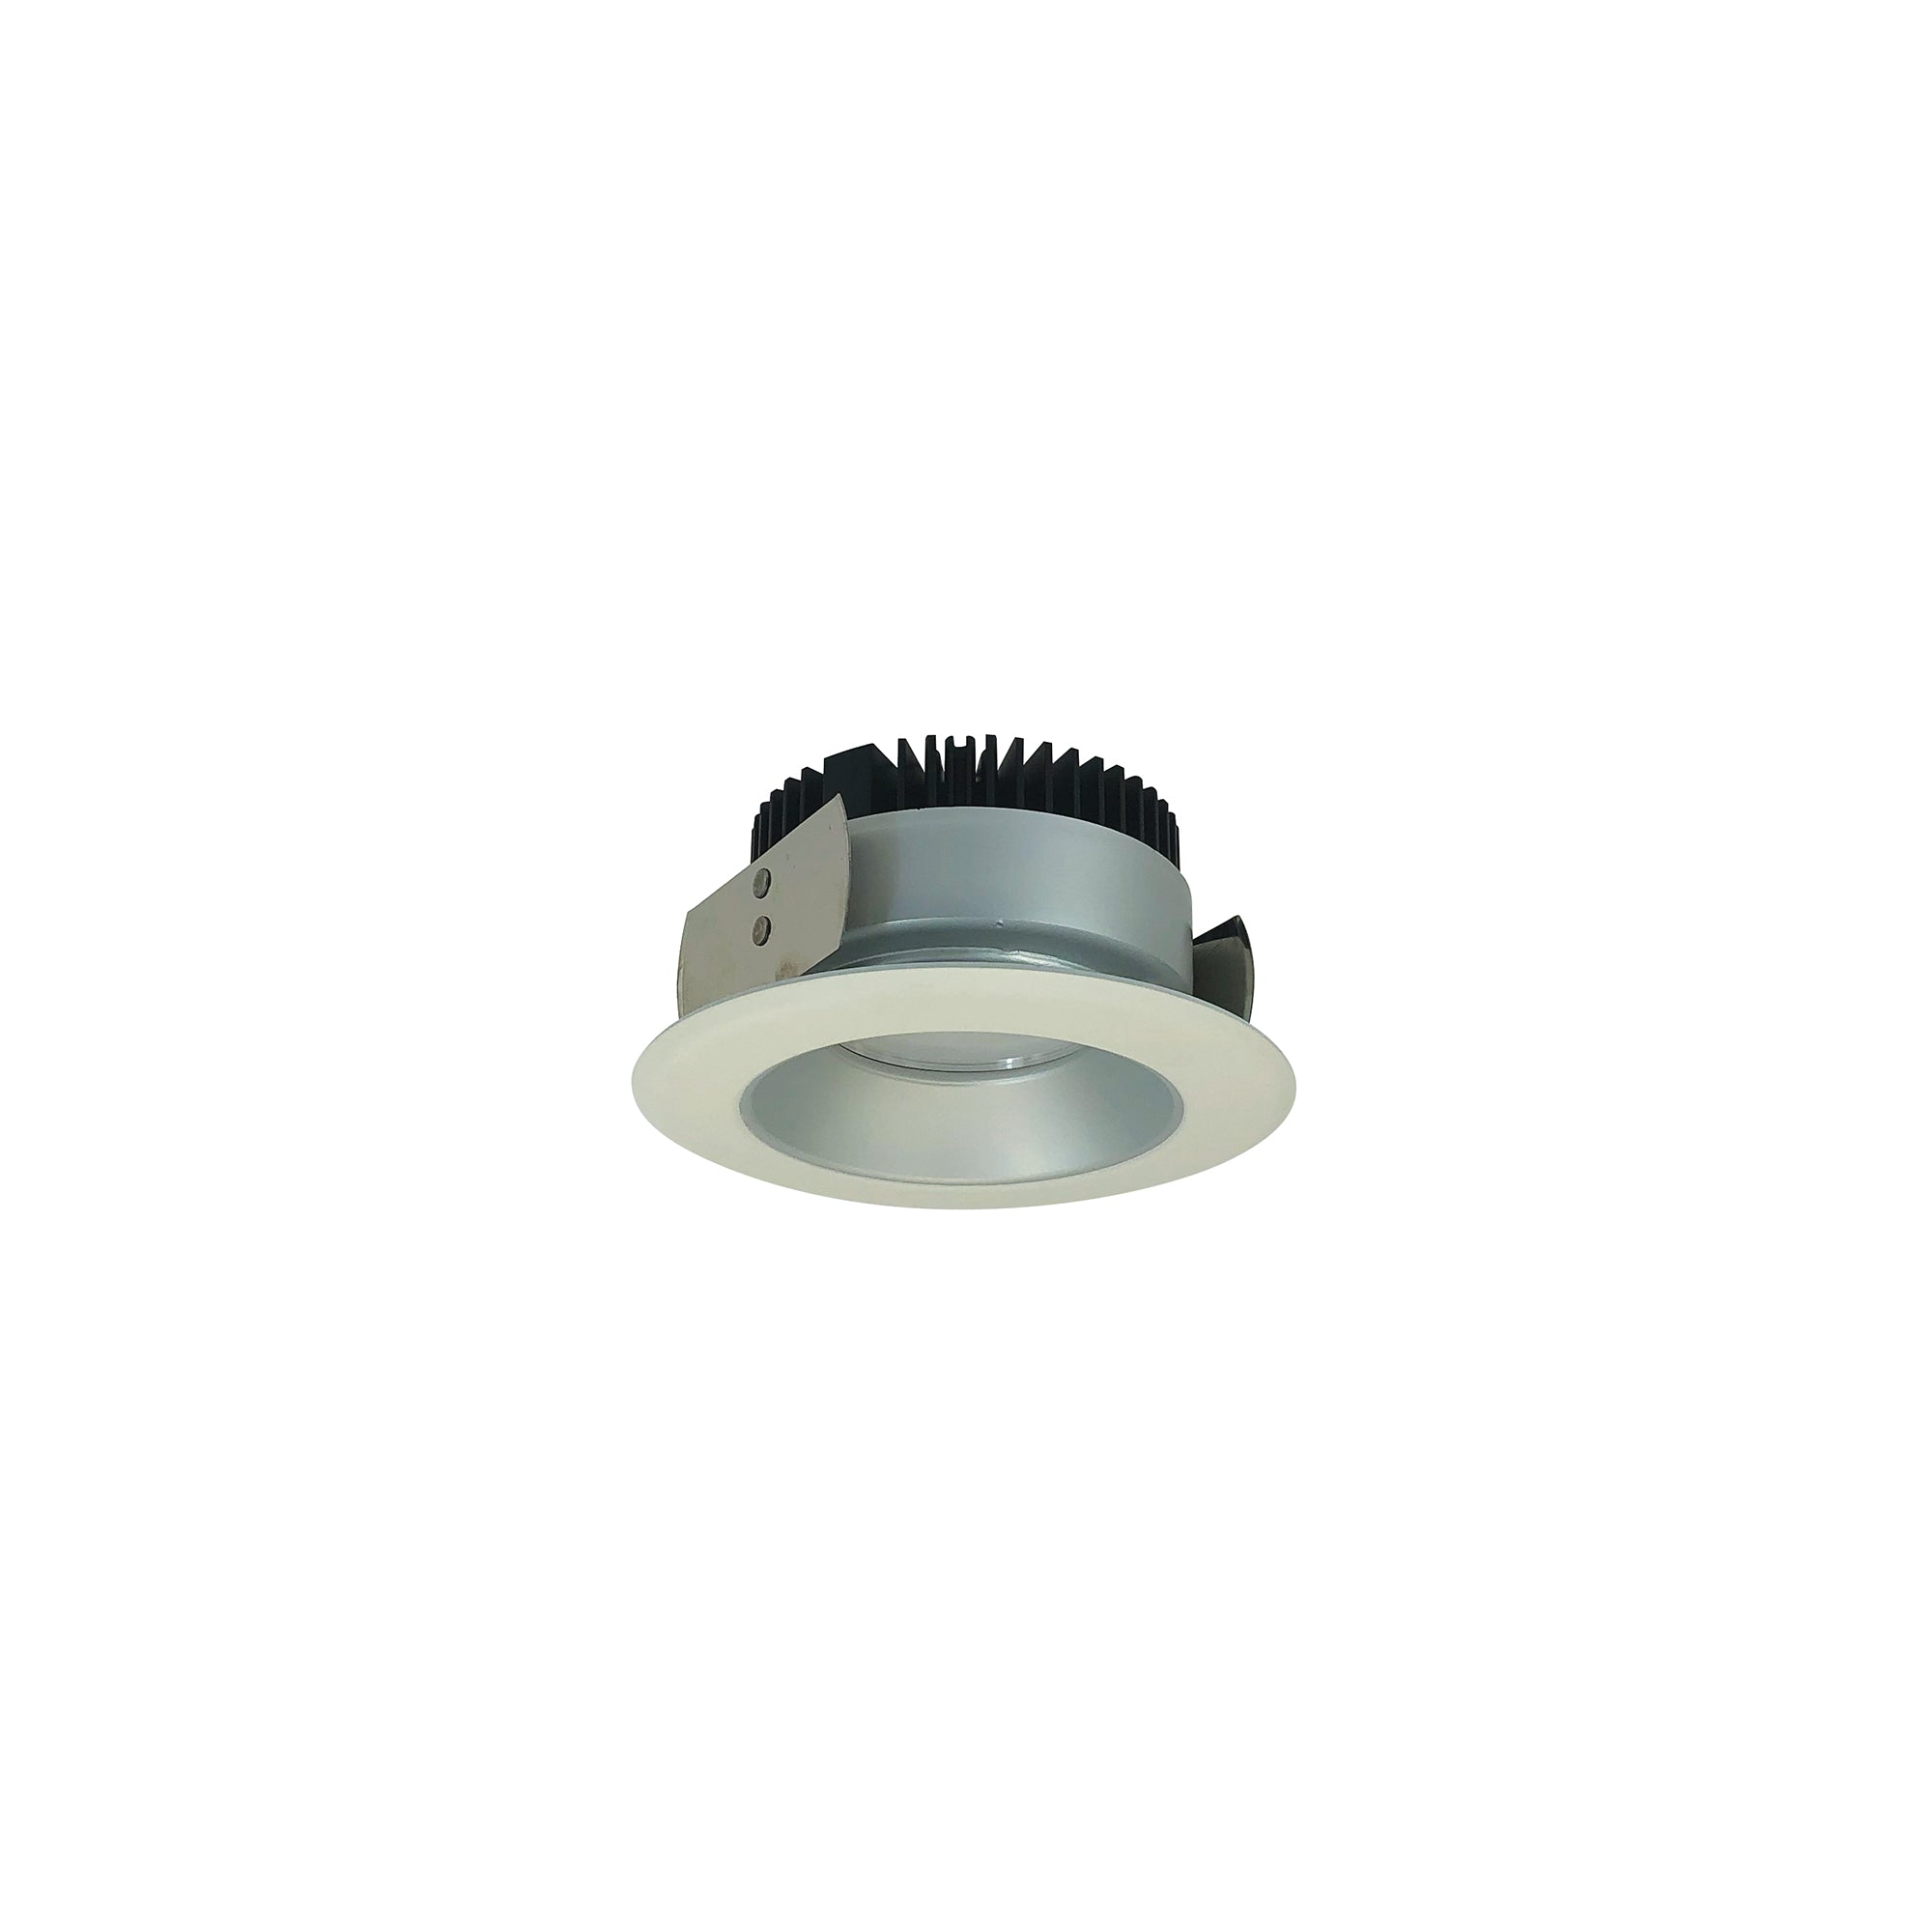 Nora Lighting NRM2-411L0935SHZW - Recessed - 4 Inch Marquise II Round Reflector, 900lm, 3500K, Spot, Haze/White